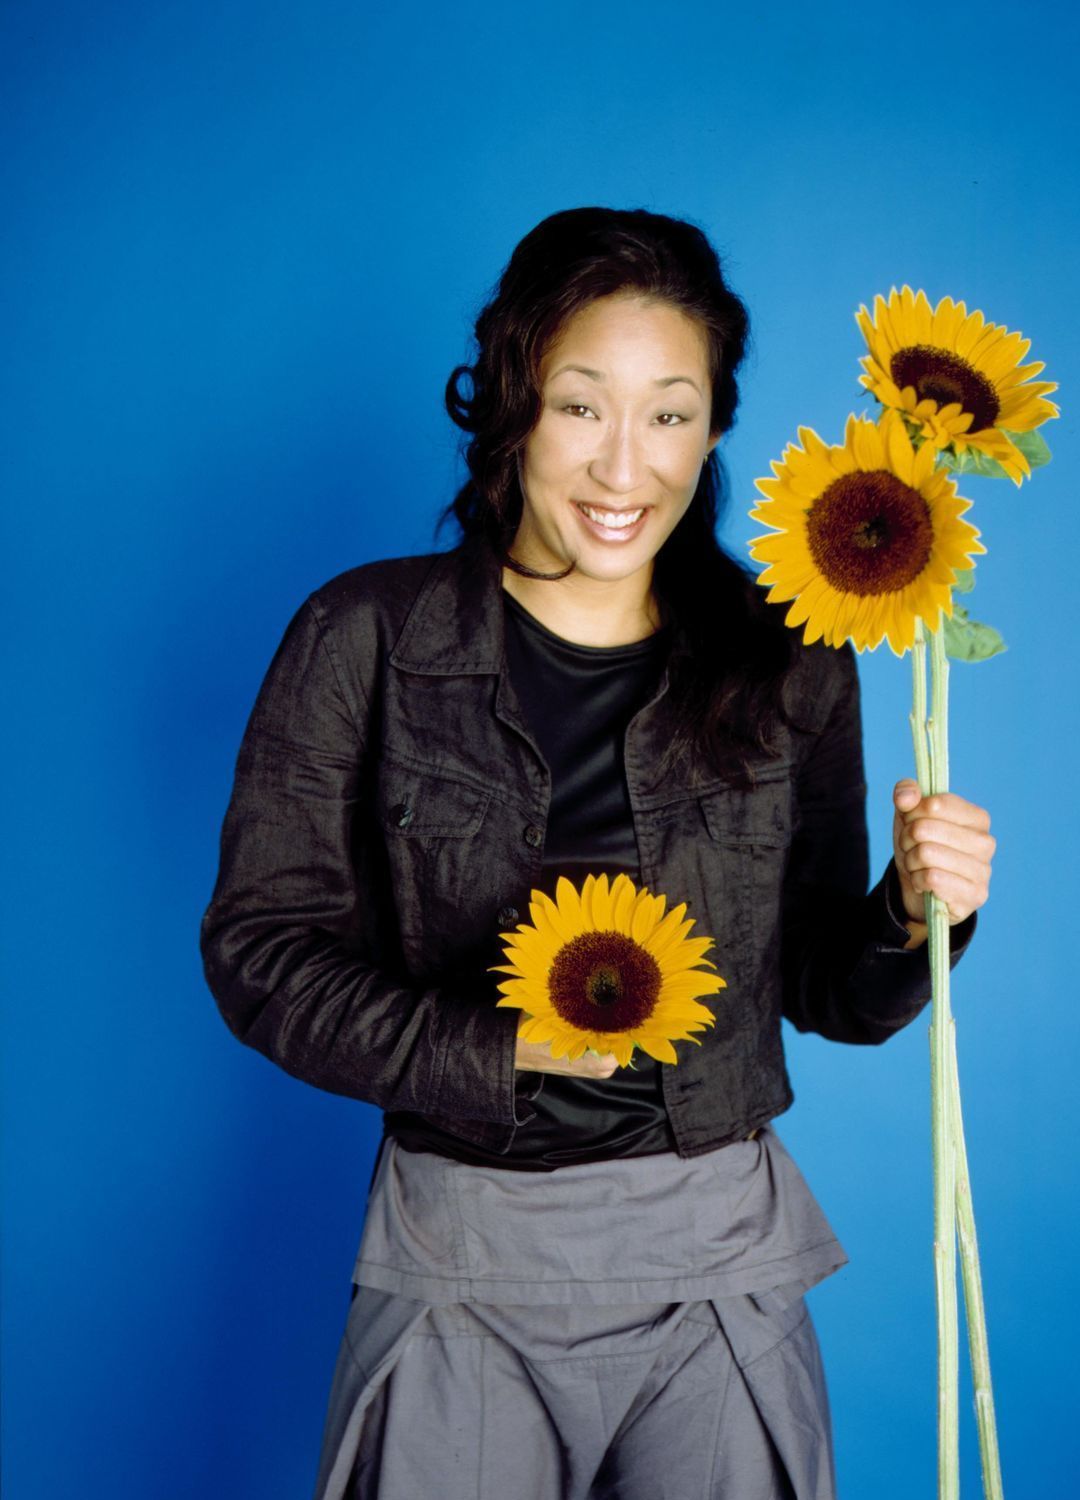 Sandra Oh Image HD Wallpaper And Background Photos